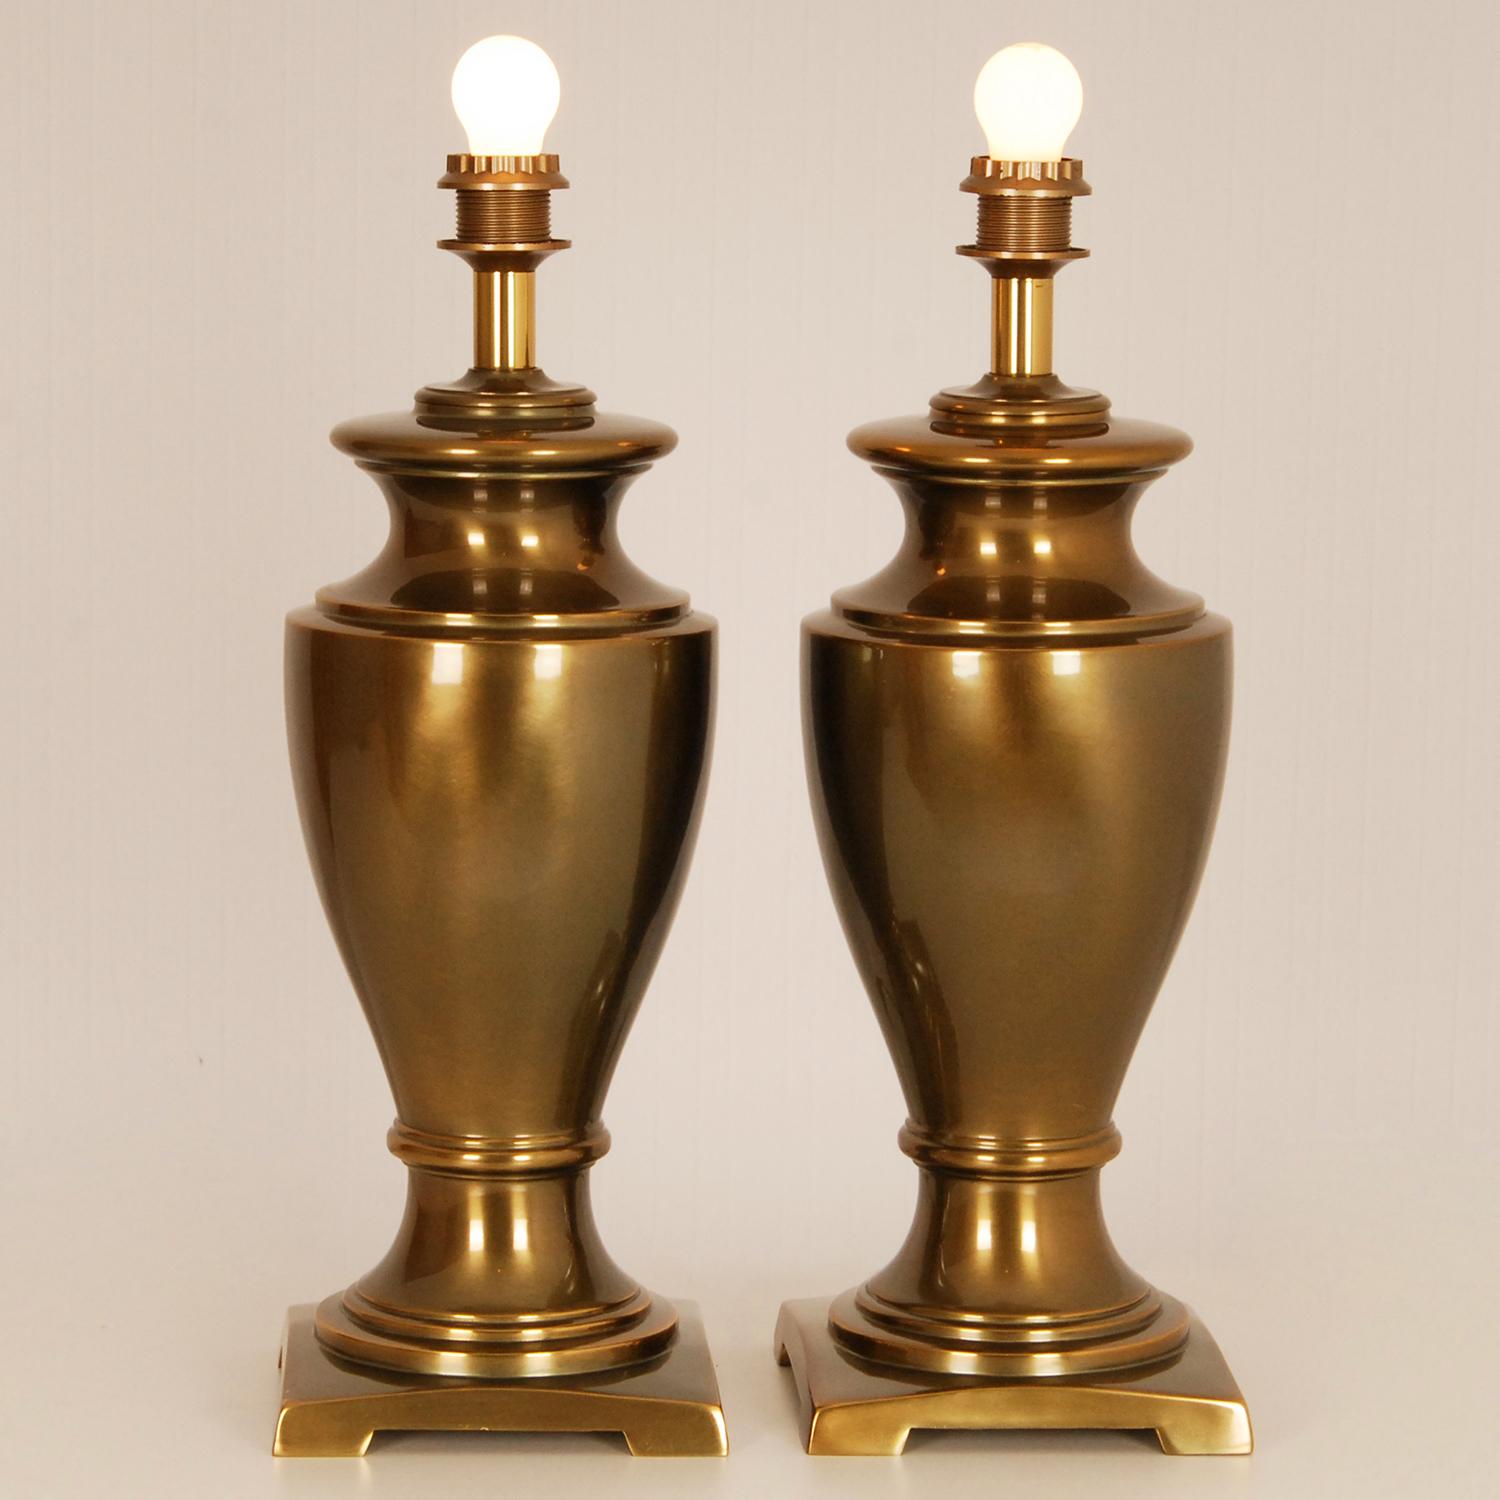 Vintage 1970s Gold Gilt Brass Neoclassical Vase Table Lamps, a Pair For Sale 1